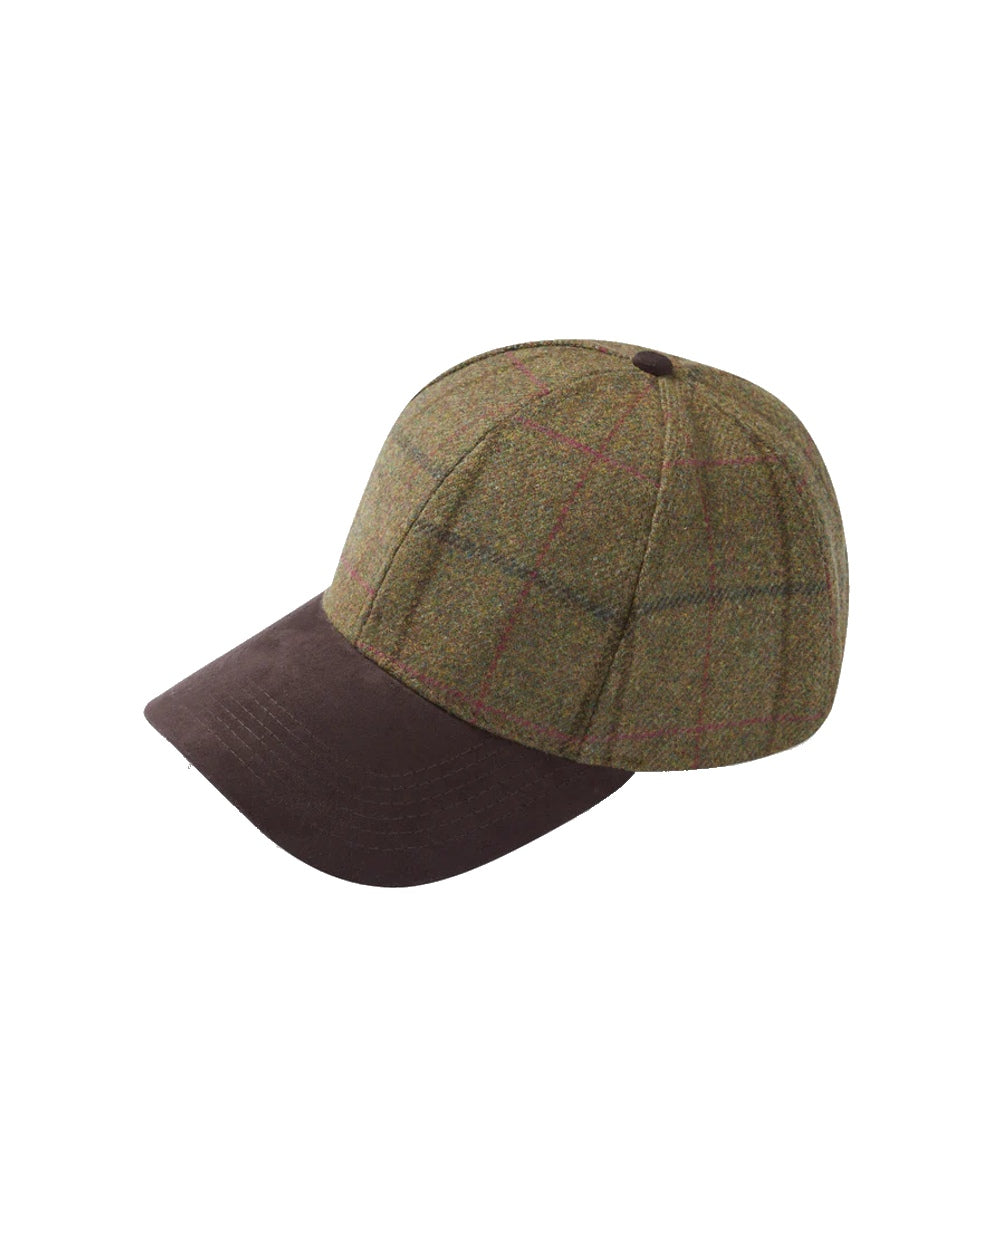 Alan Paine Combrook Tweed Baseball Cap in Thyme 